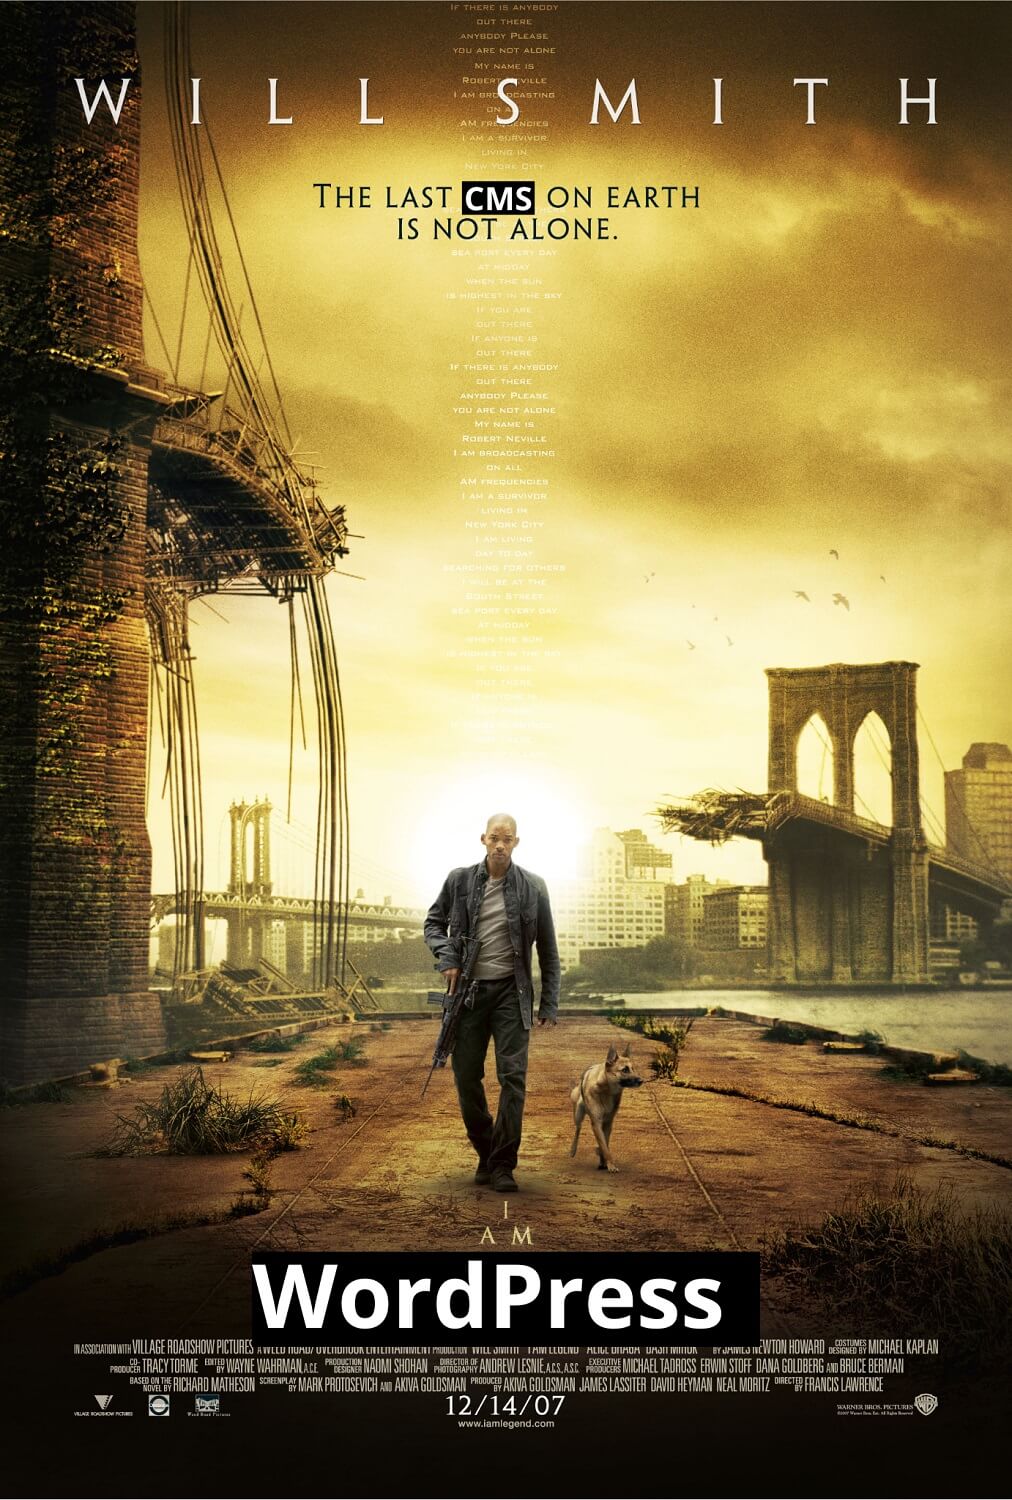 The “I Am Legend” movie poster meme with a new tagline “The last CMS on Earth is not alone” and a new title “I Am WordPress”